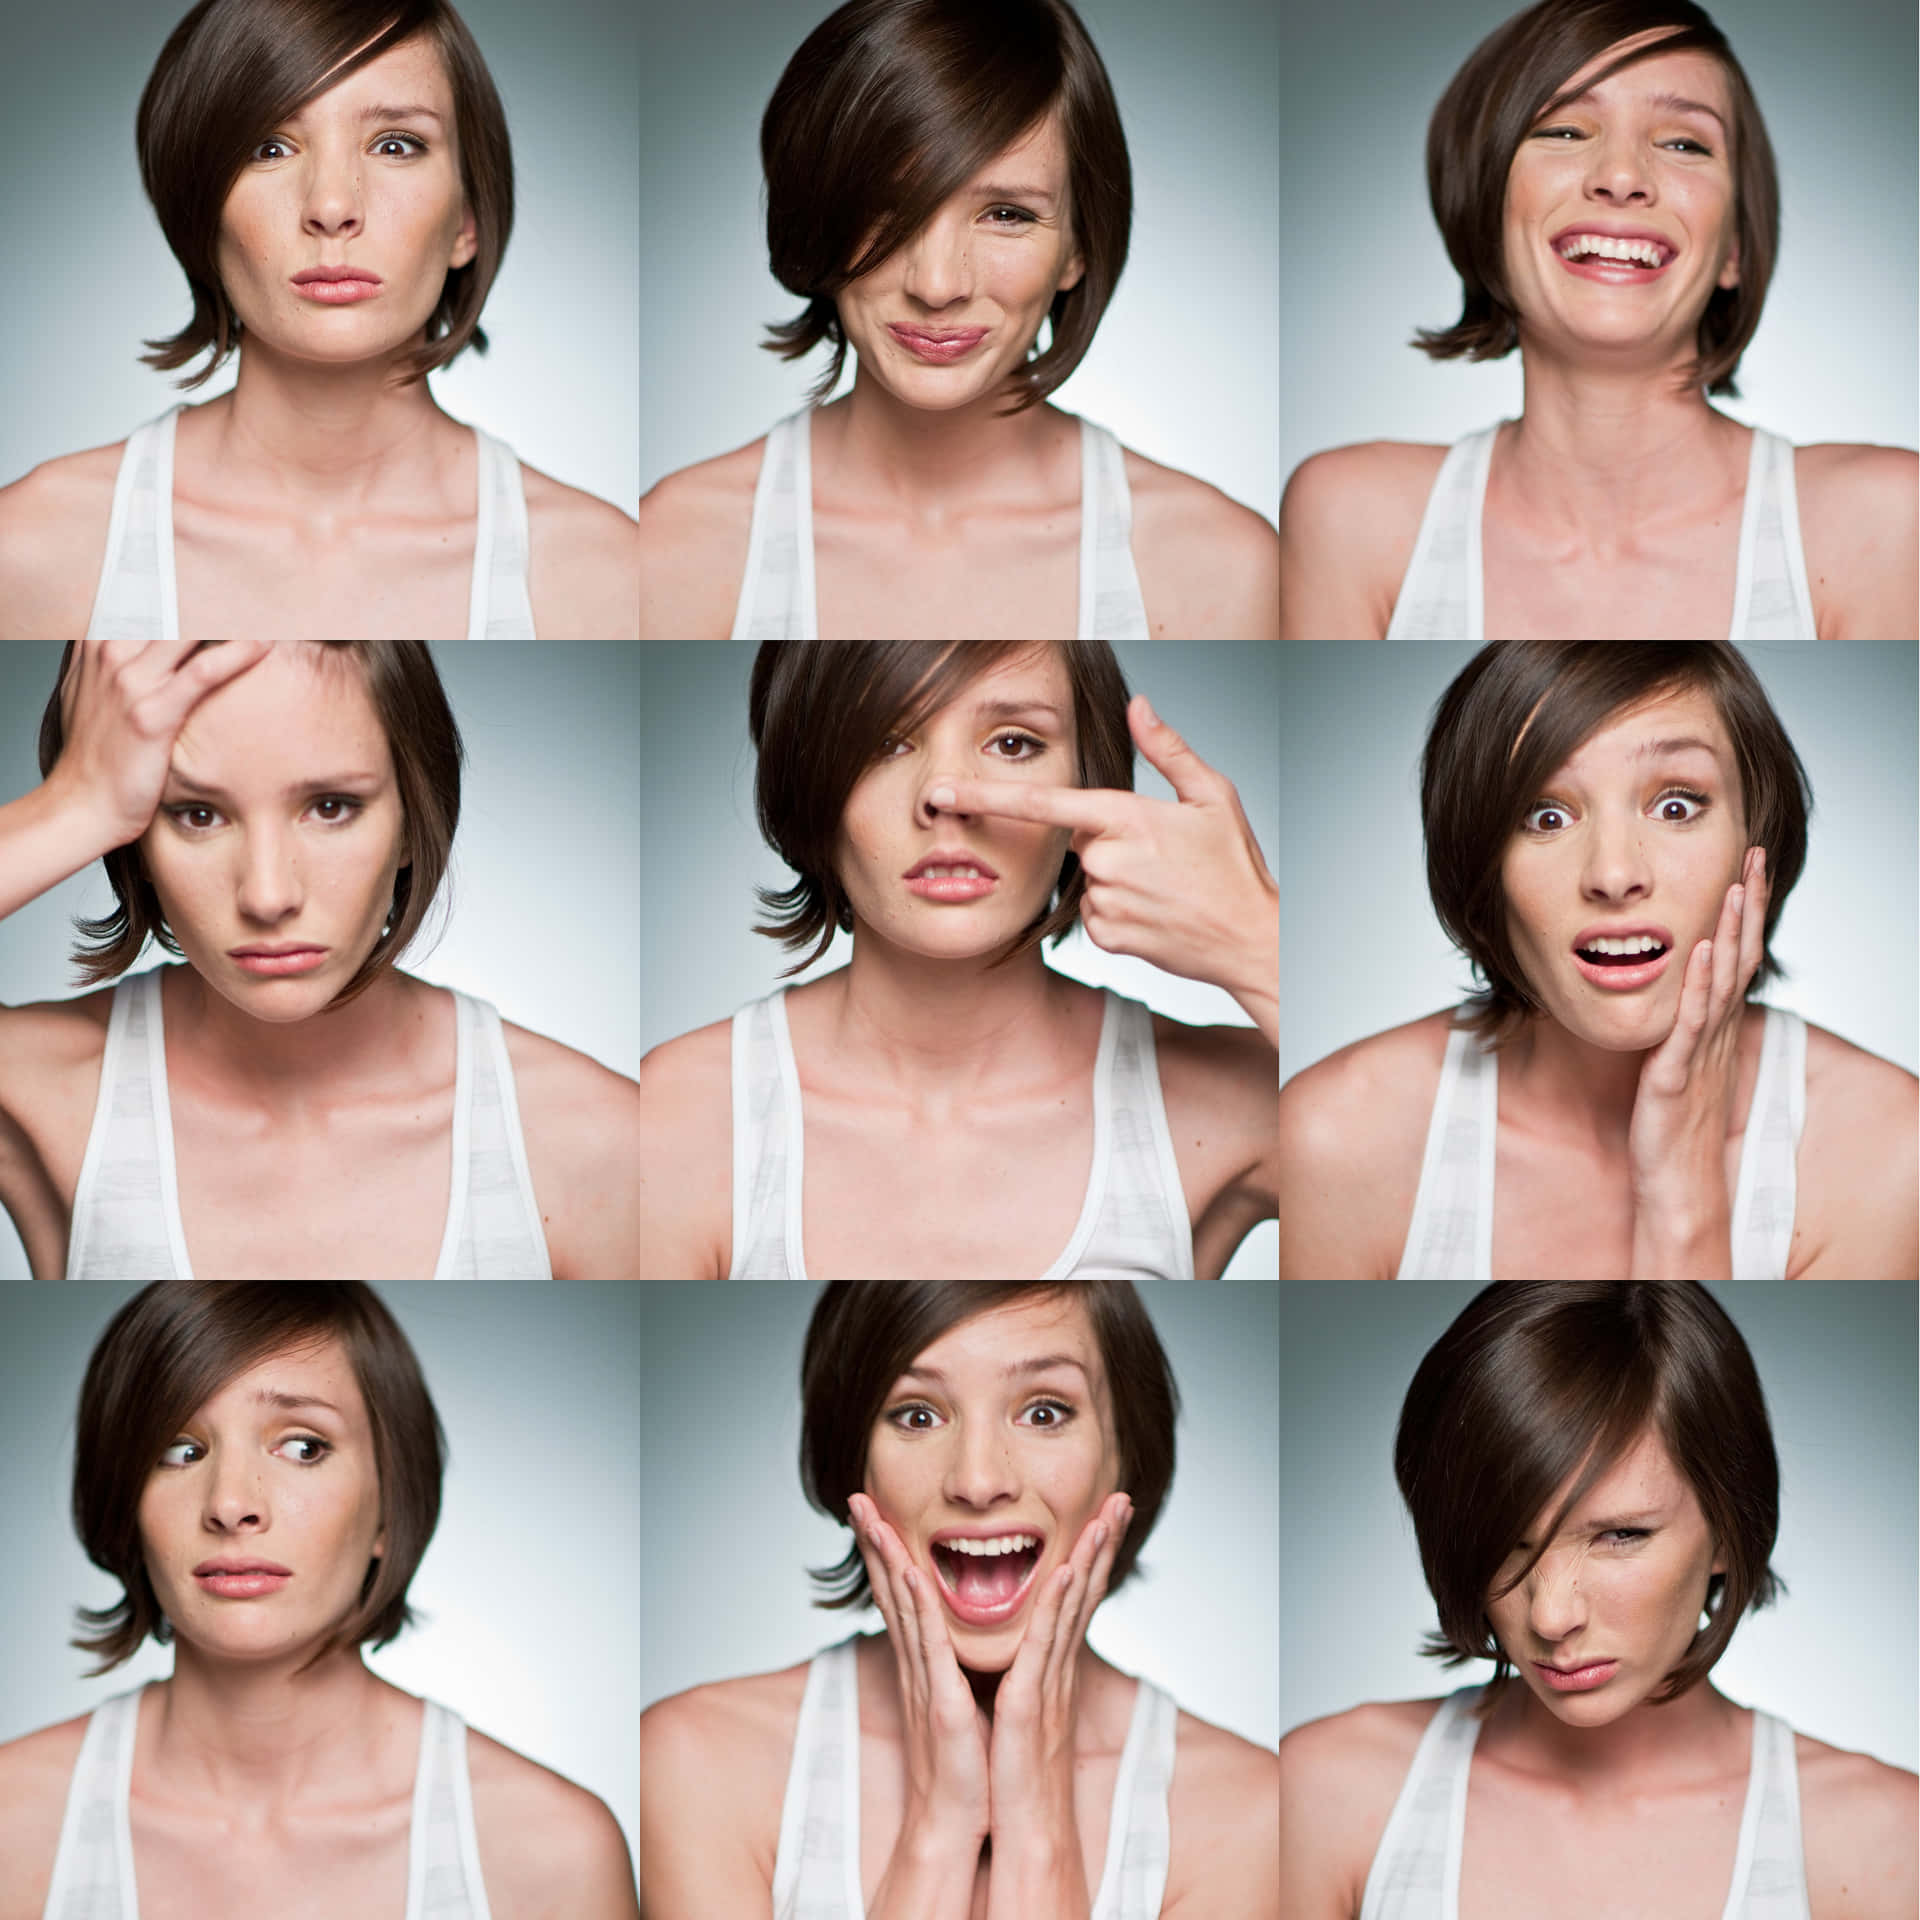 A Woman In Different Poses With Different Expressions